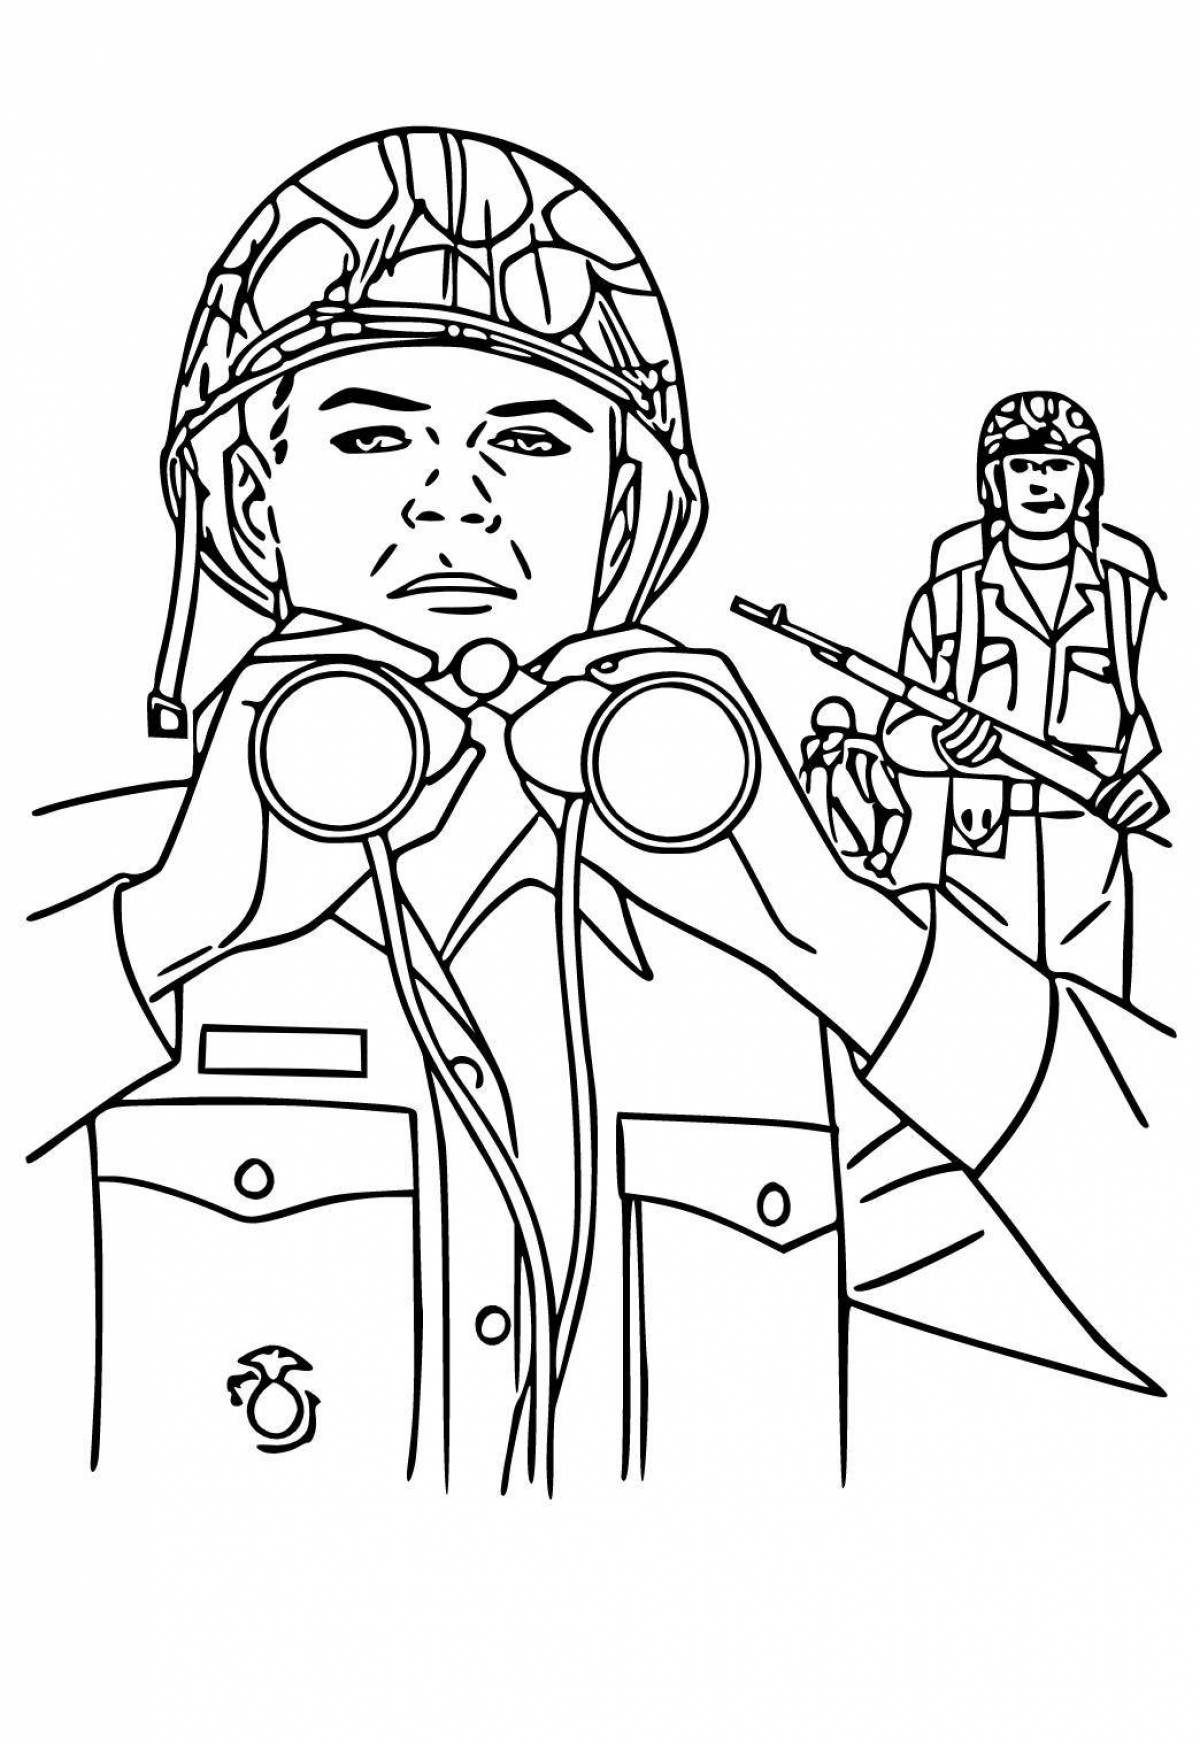 Amazing army coloring book for kids